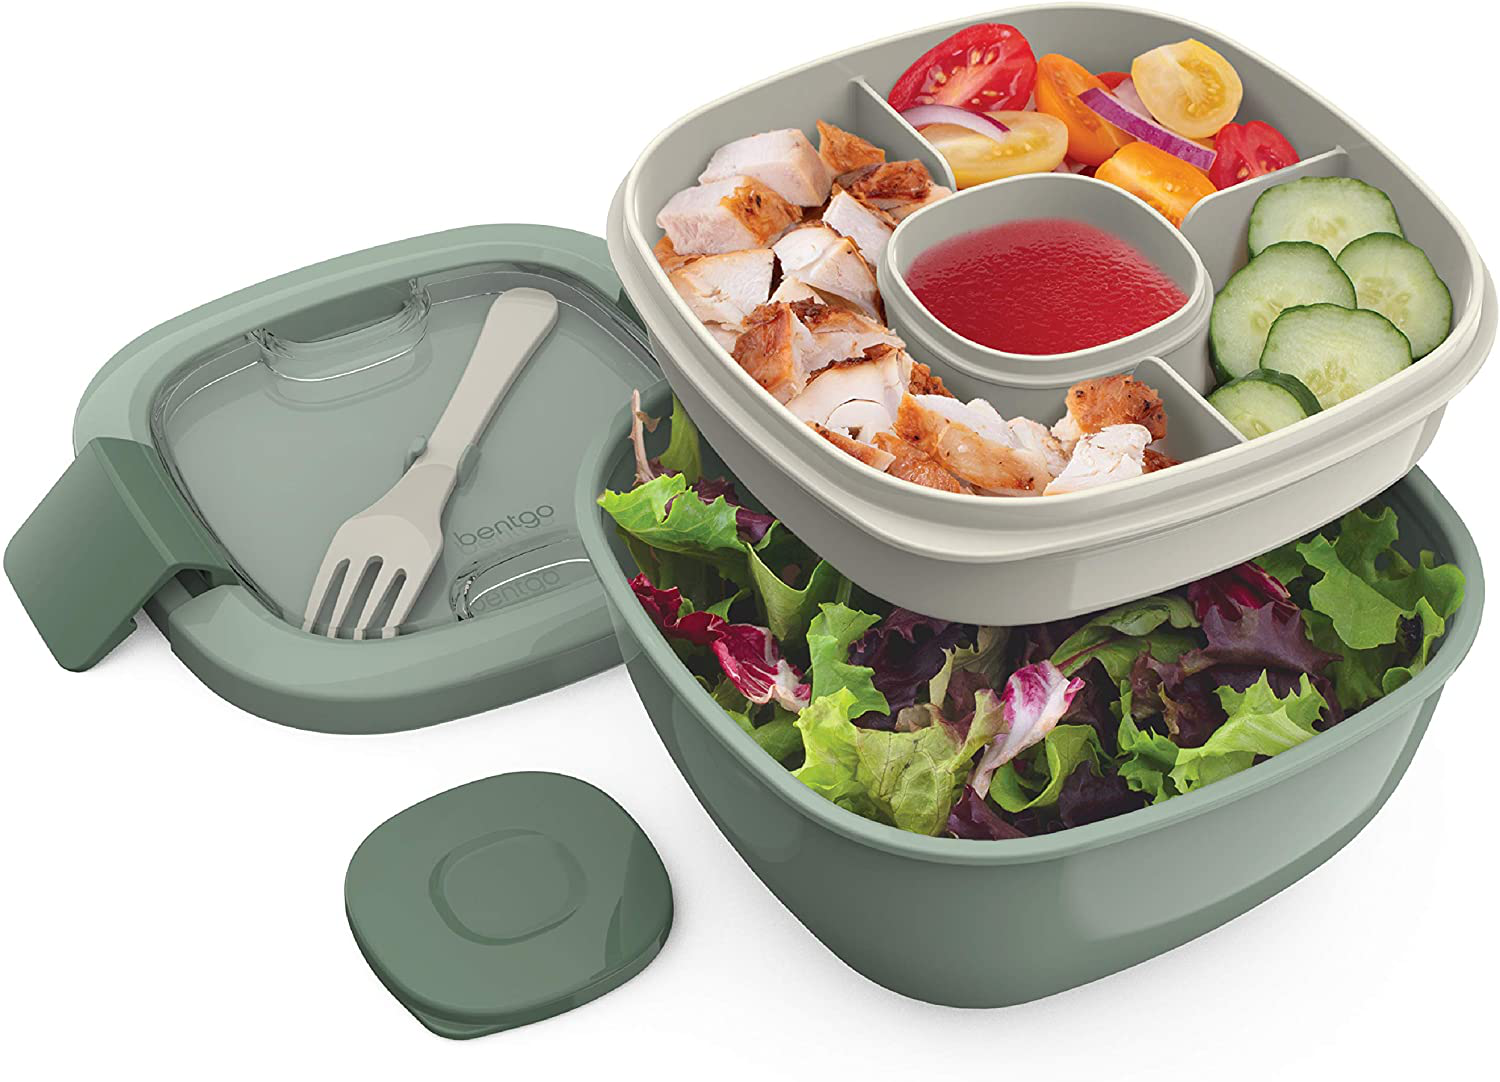 Bentgo Salad - Stackable Lunch Container with Large 54-oz Salad Bowl, 4-Compartment Bento-Style Tray for Toppings, 3-oz Sauce Container for Dressings, Built-In Reusable Fork & BPA-Free (Khaki Green)